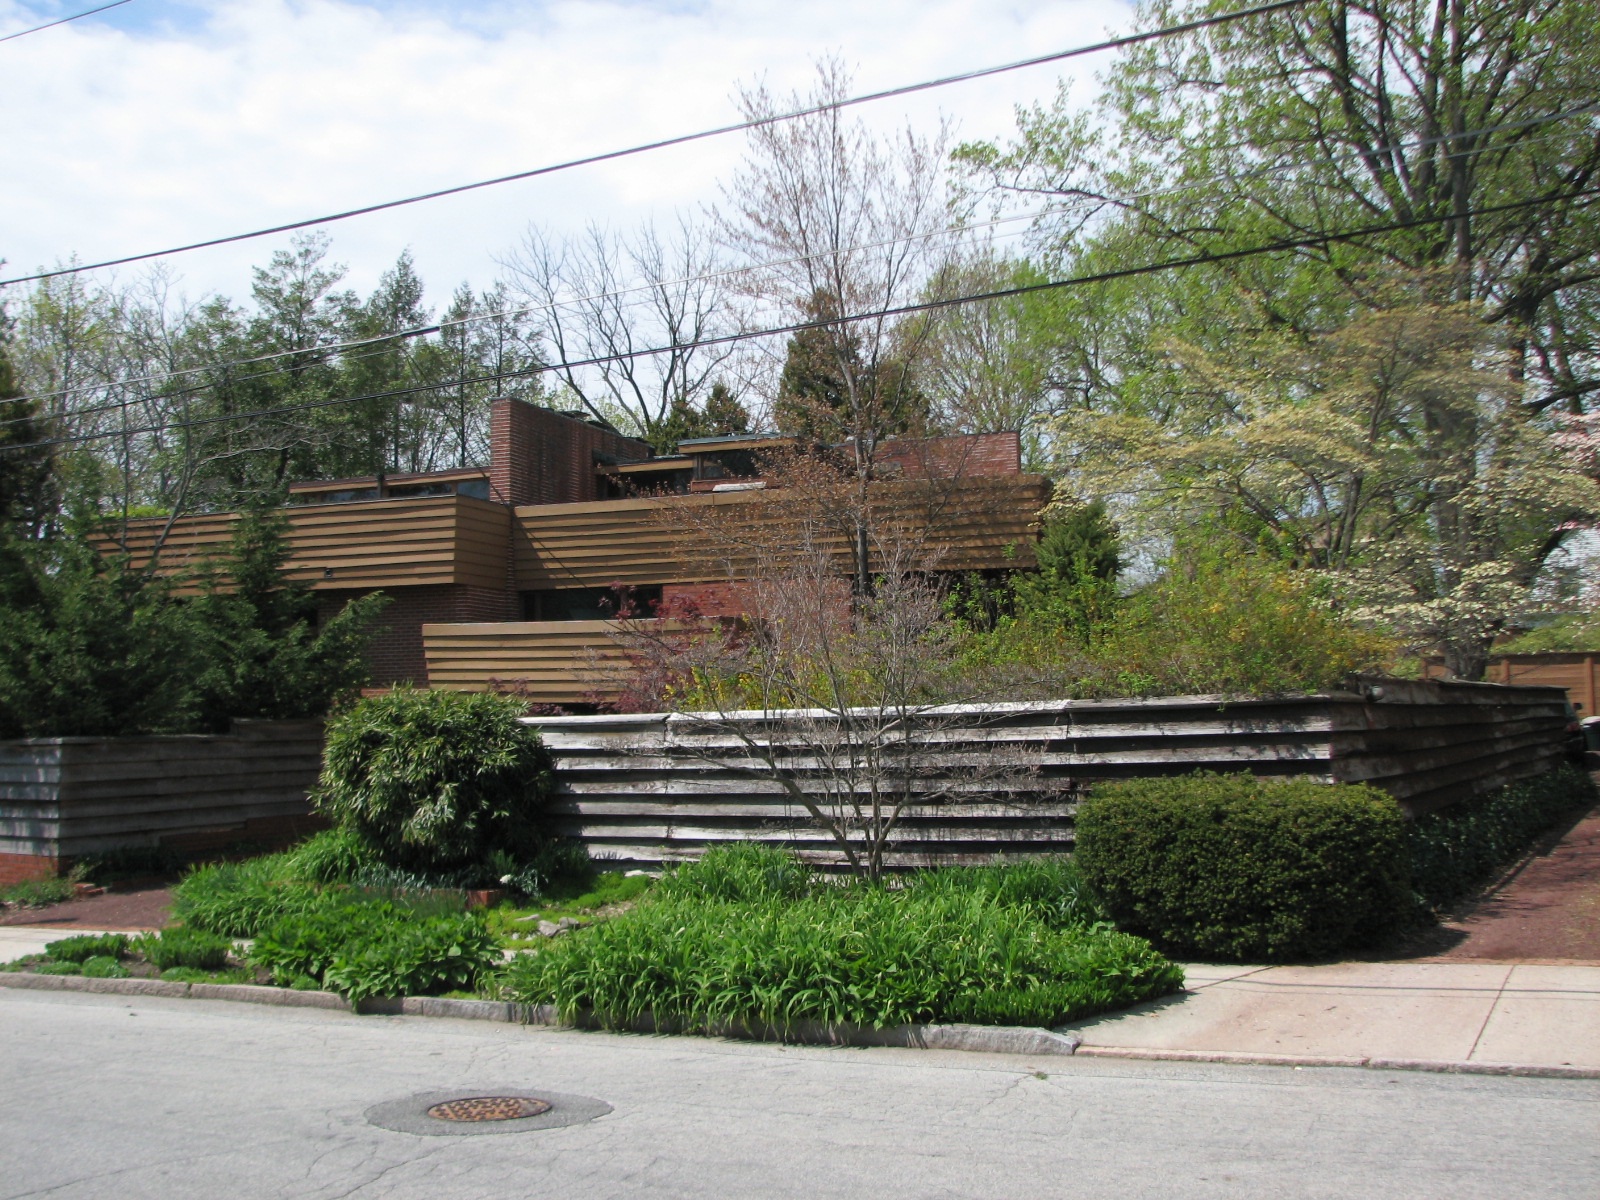 Frank Lloyd Wright's distinctive horizontal style is evident in Ardmore's Suntop Homes.